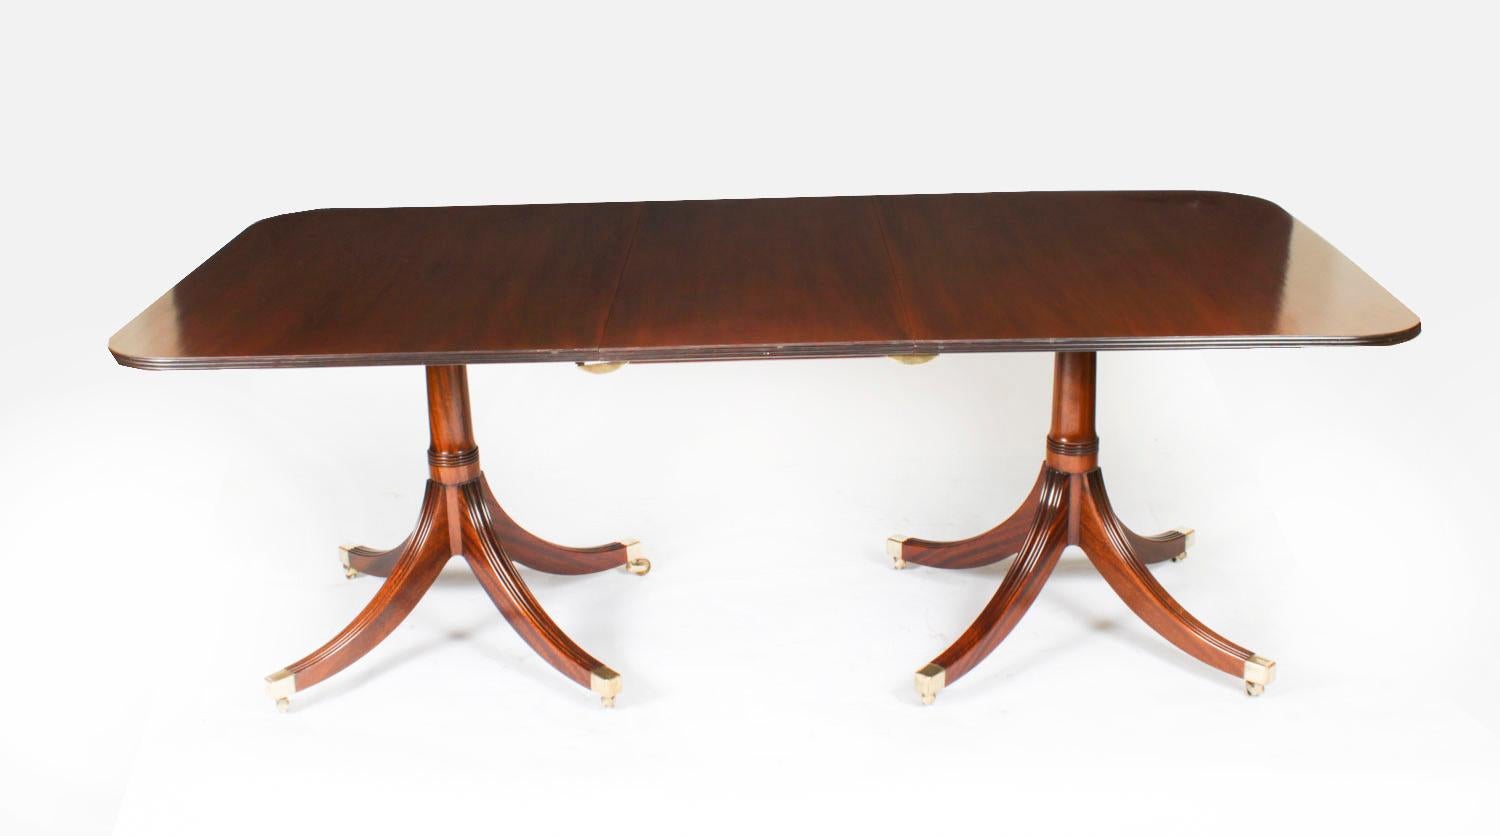 Vintage 7ft Regency Revival Dining Table William Tillman, Late 20th Century For Sale 9